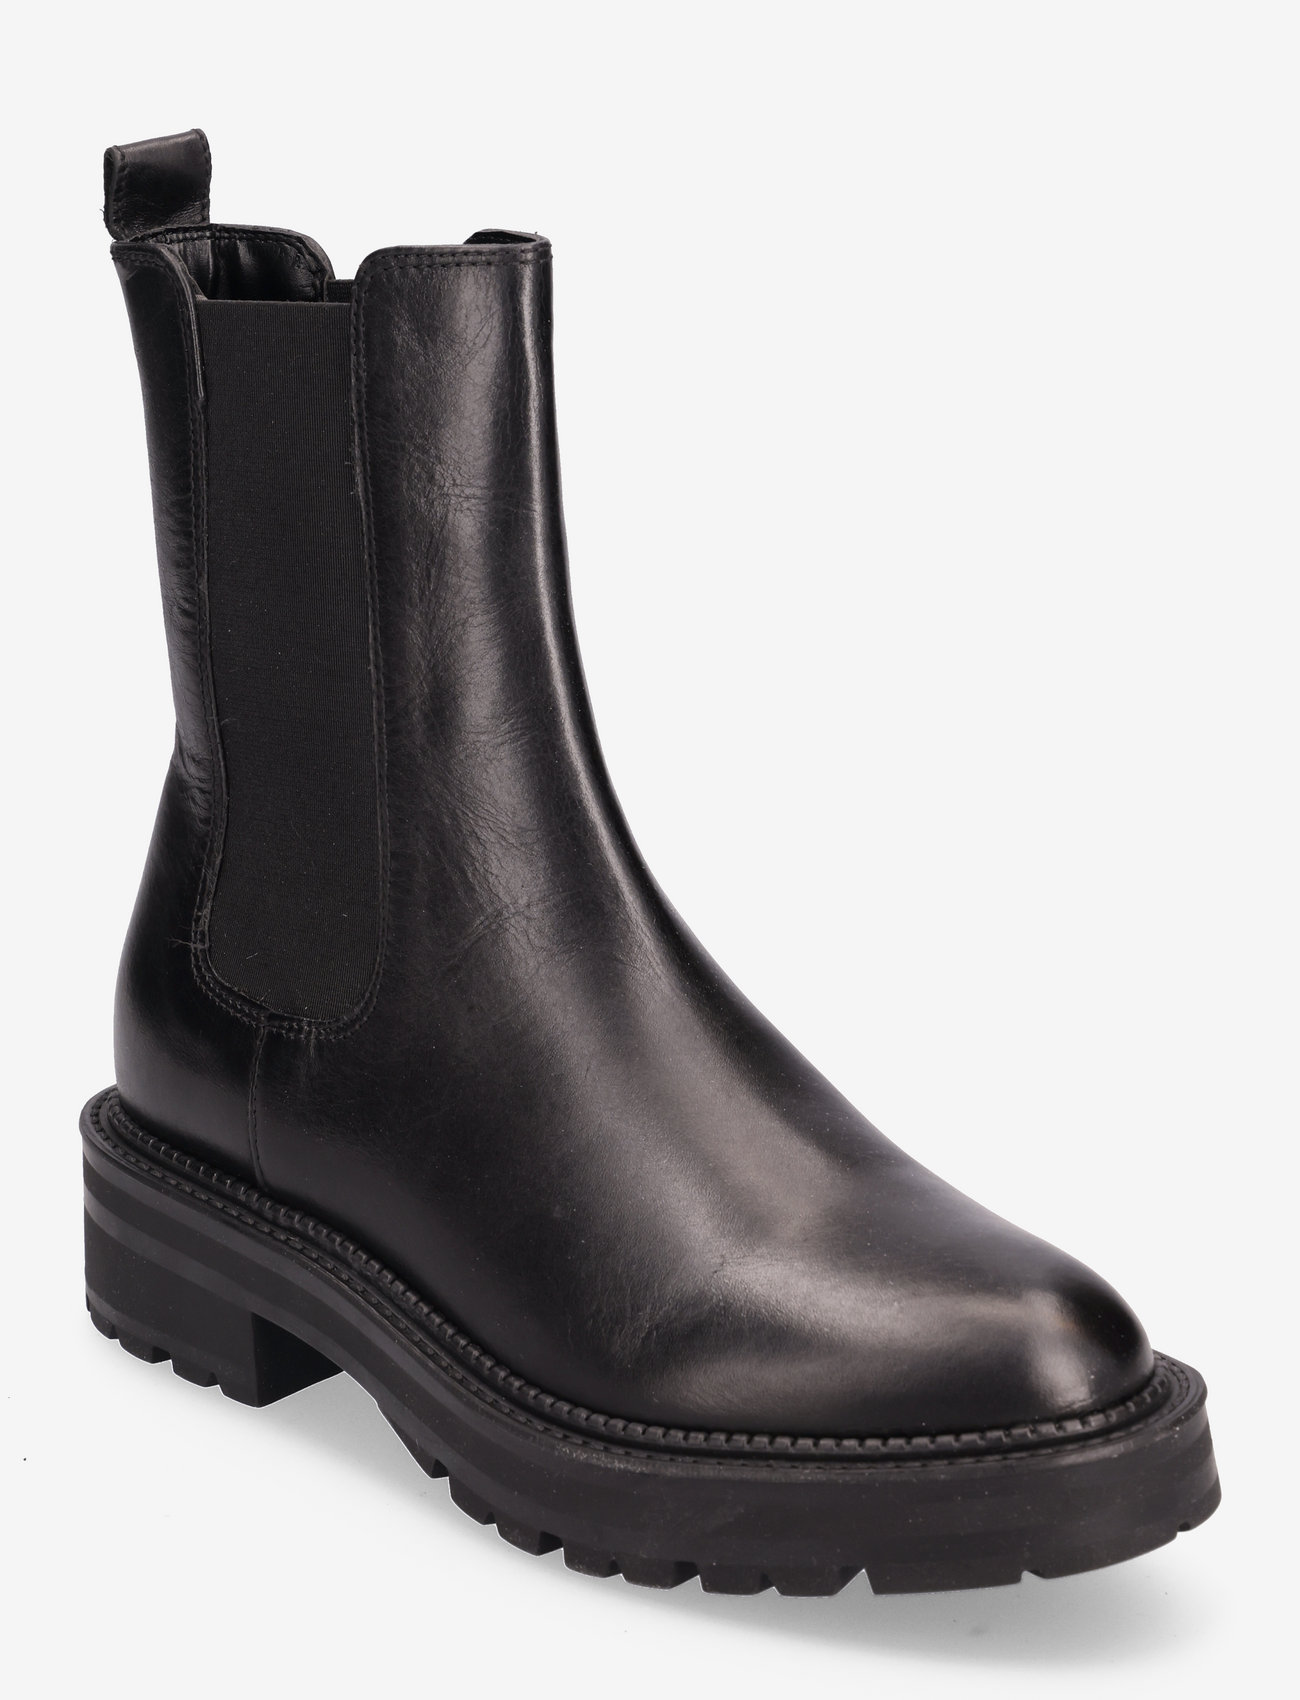 Dune London - picture - flat ankle boots - black - 0